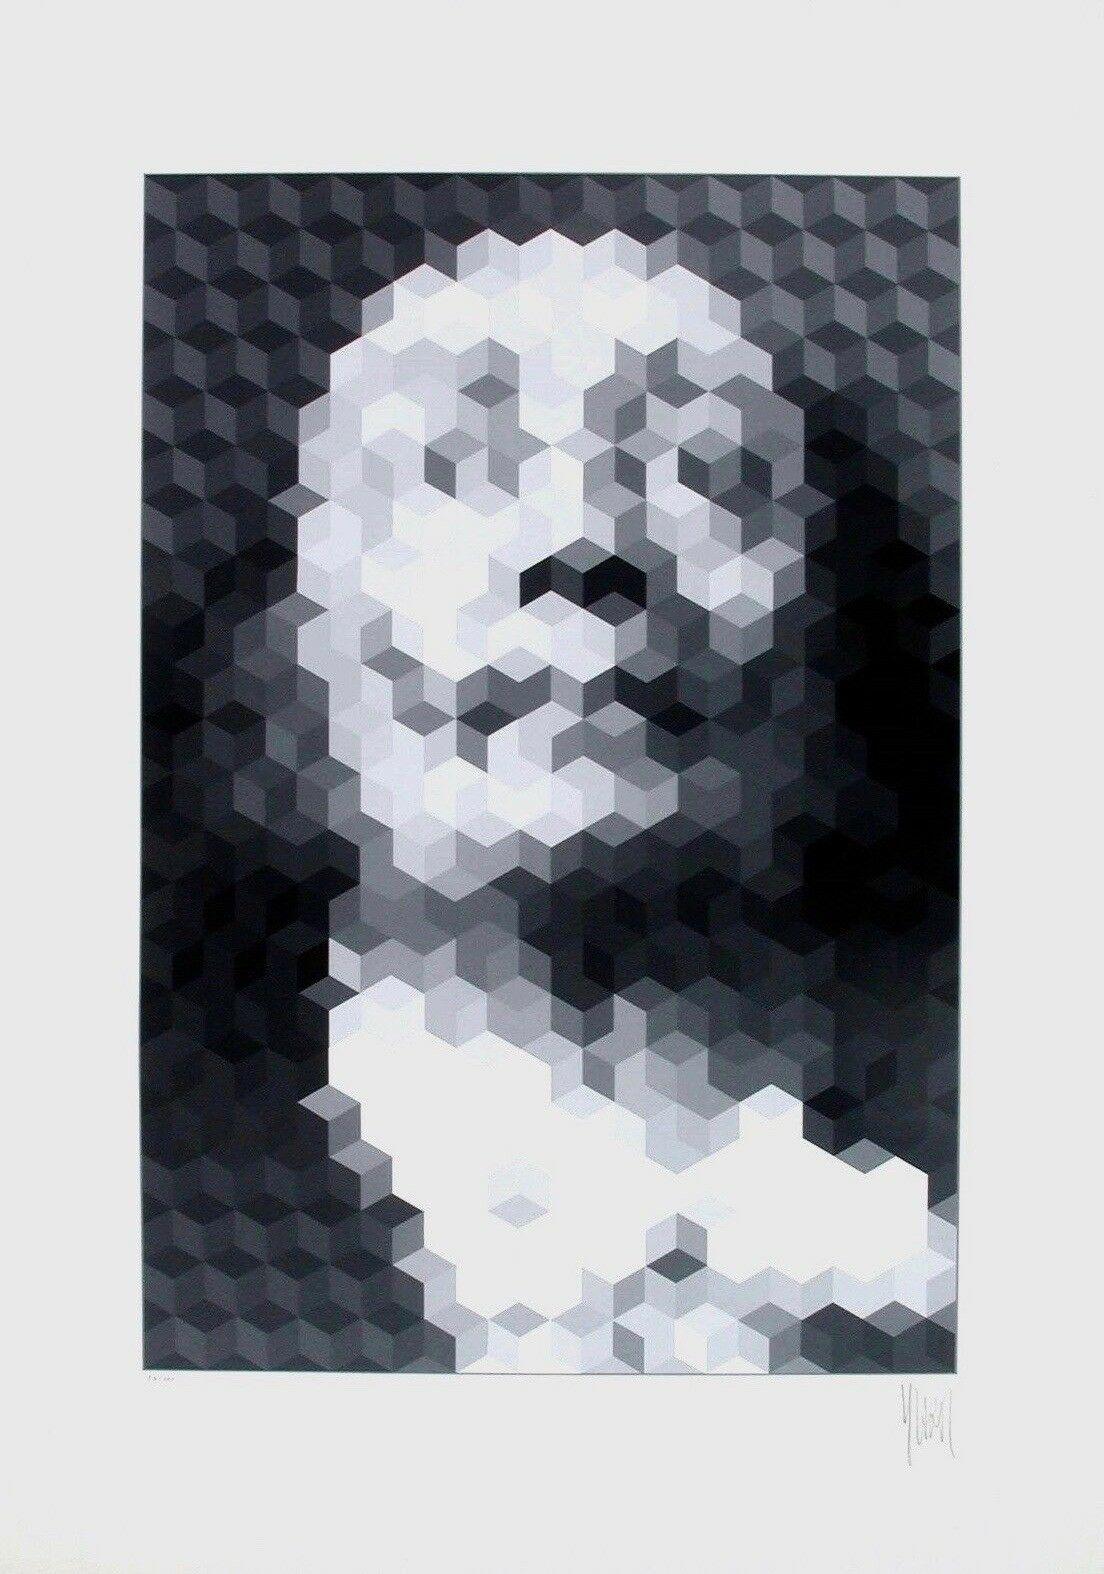 Faces of Dali #2, Yvaral - Print by Yvaral (Jean-Pierre Vasarely)